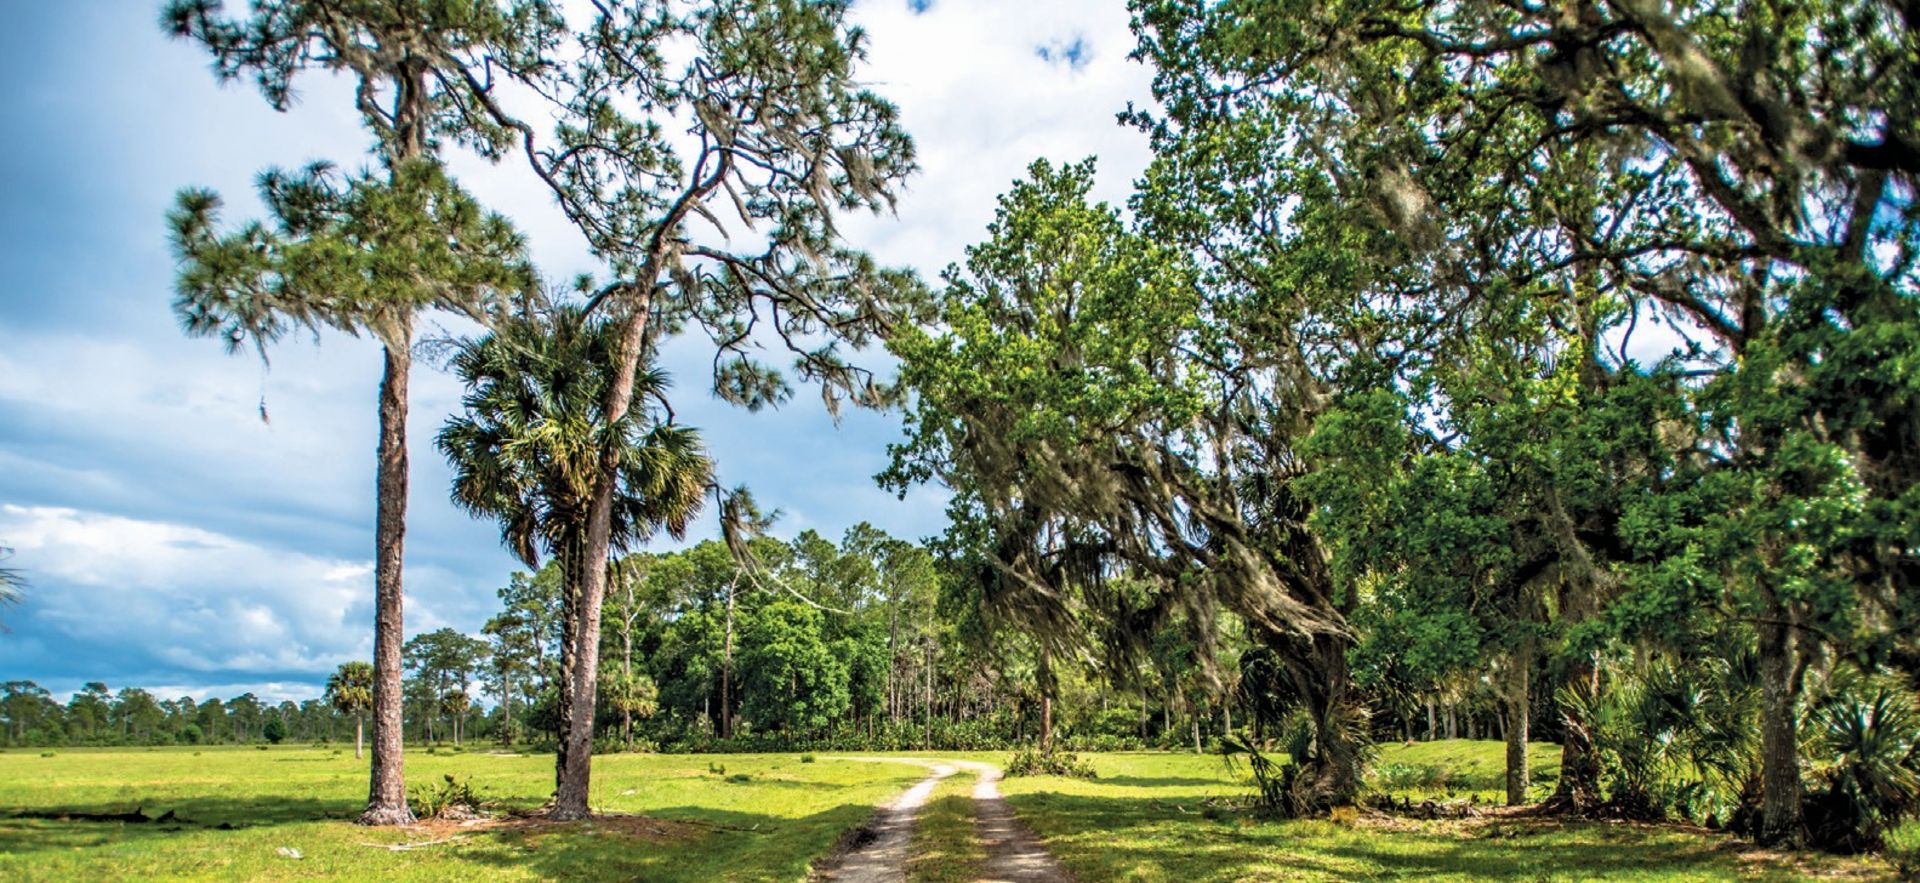 Claim This Slice of Charlotte County, Florida! - Image 9 of 14